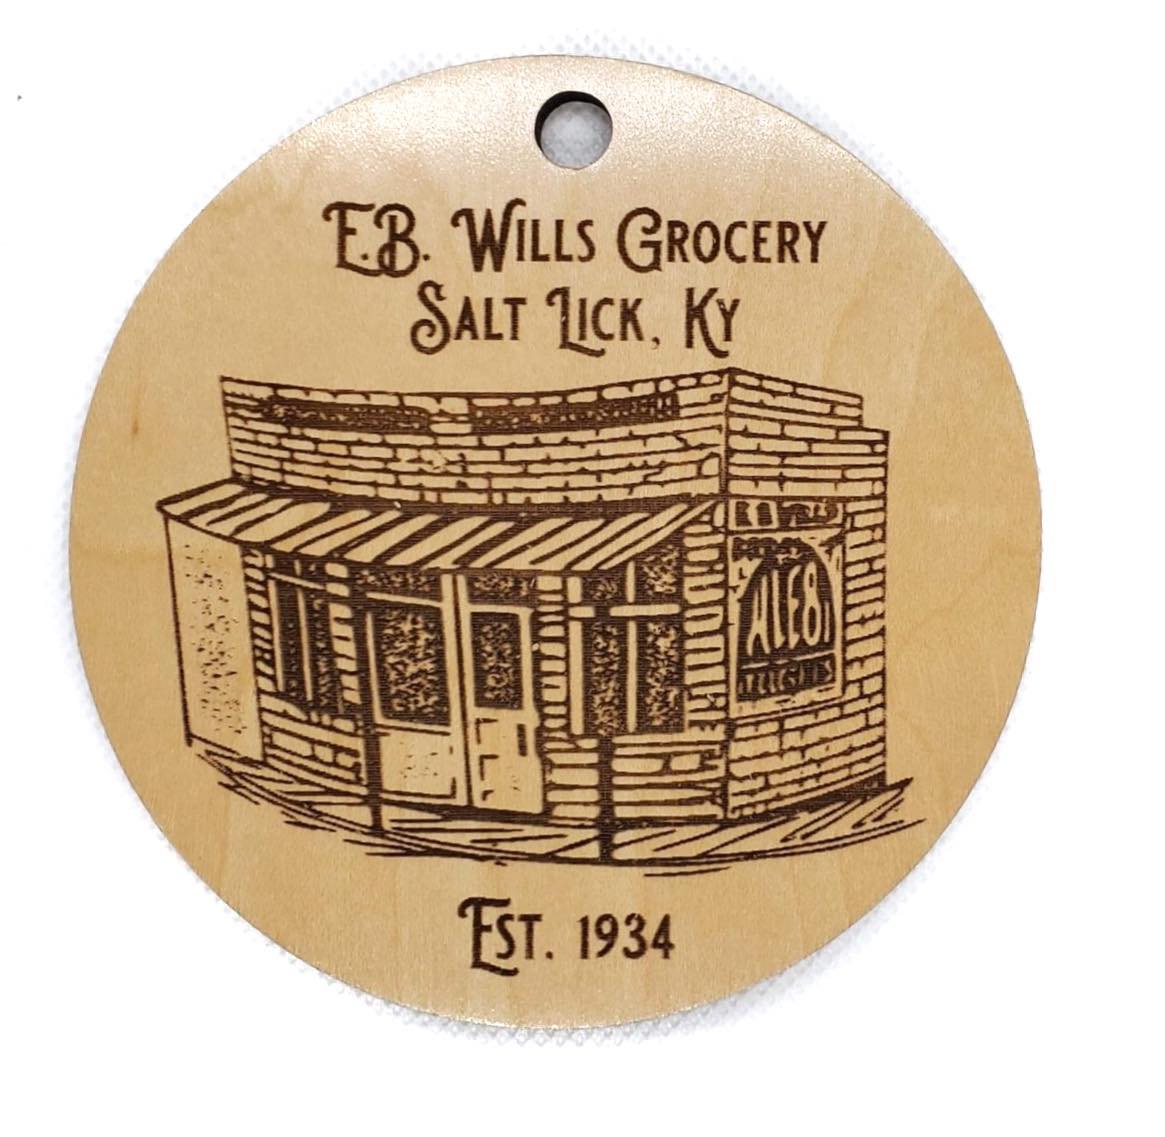 E.B. Wills Grocery - Bath Co. Kentucky Historical Ornaments - The Salty Lick Mercantile